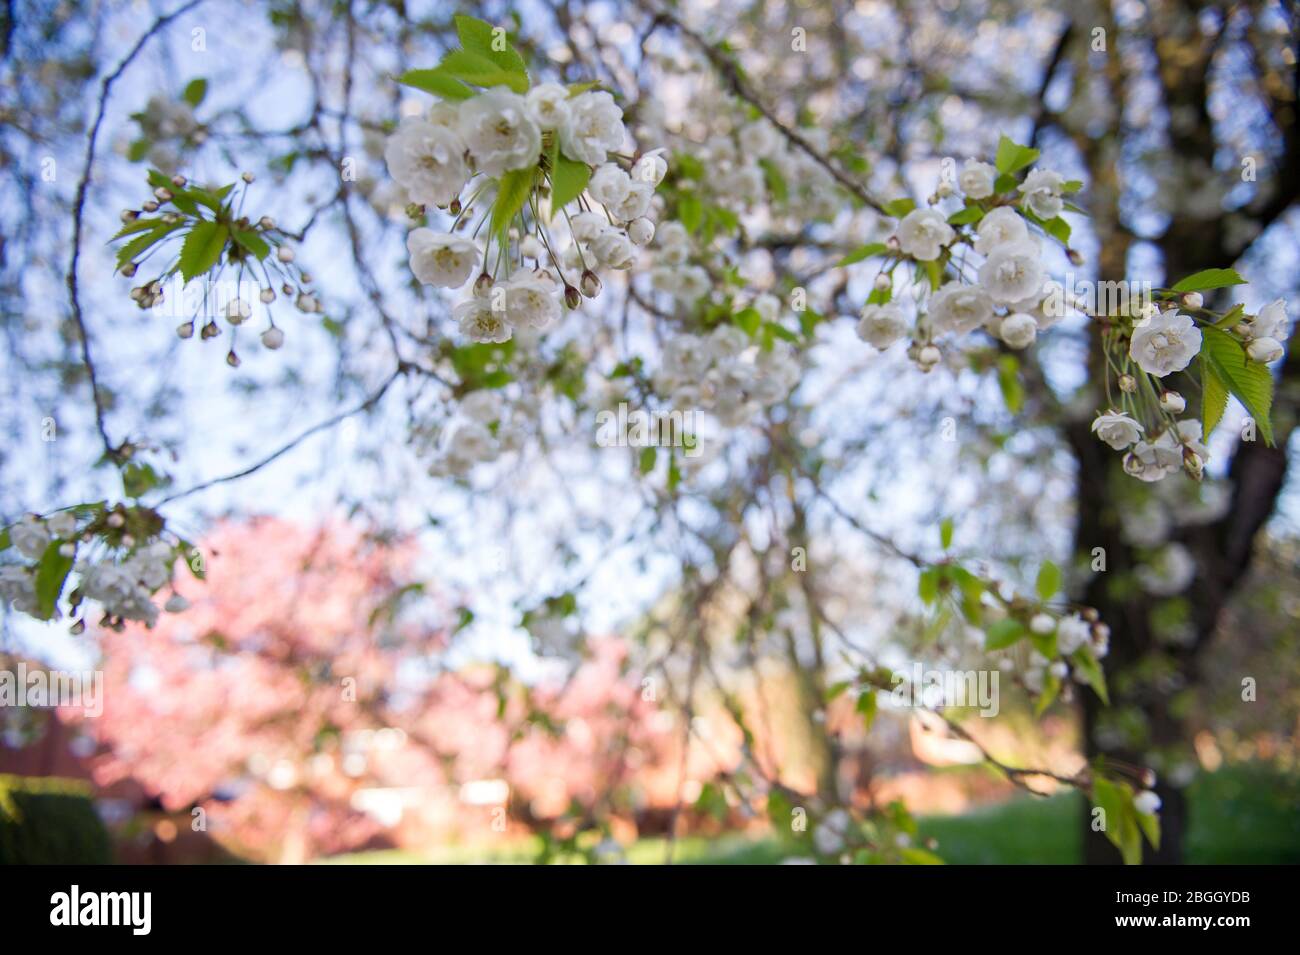 Glasgow, UK. 21st Apr, 2020. Pictured: Cherry blossom blooms all over Glasgow's West End area. Bright pink and pure white blooms flower from the cherry trees. Locals stop to smell the scents from the branches. Credit: Colin Fisher/Alamy Live News Stock Photo